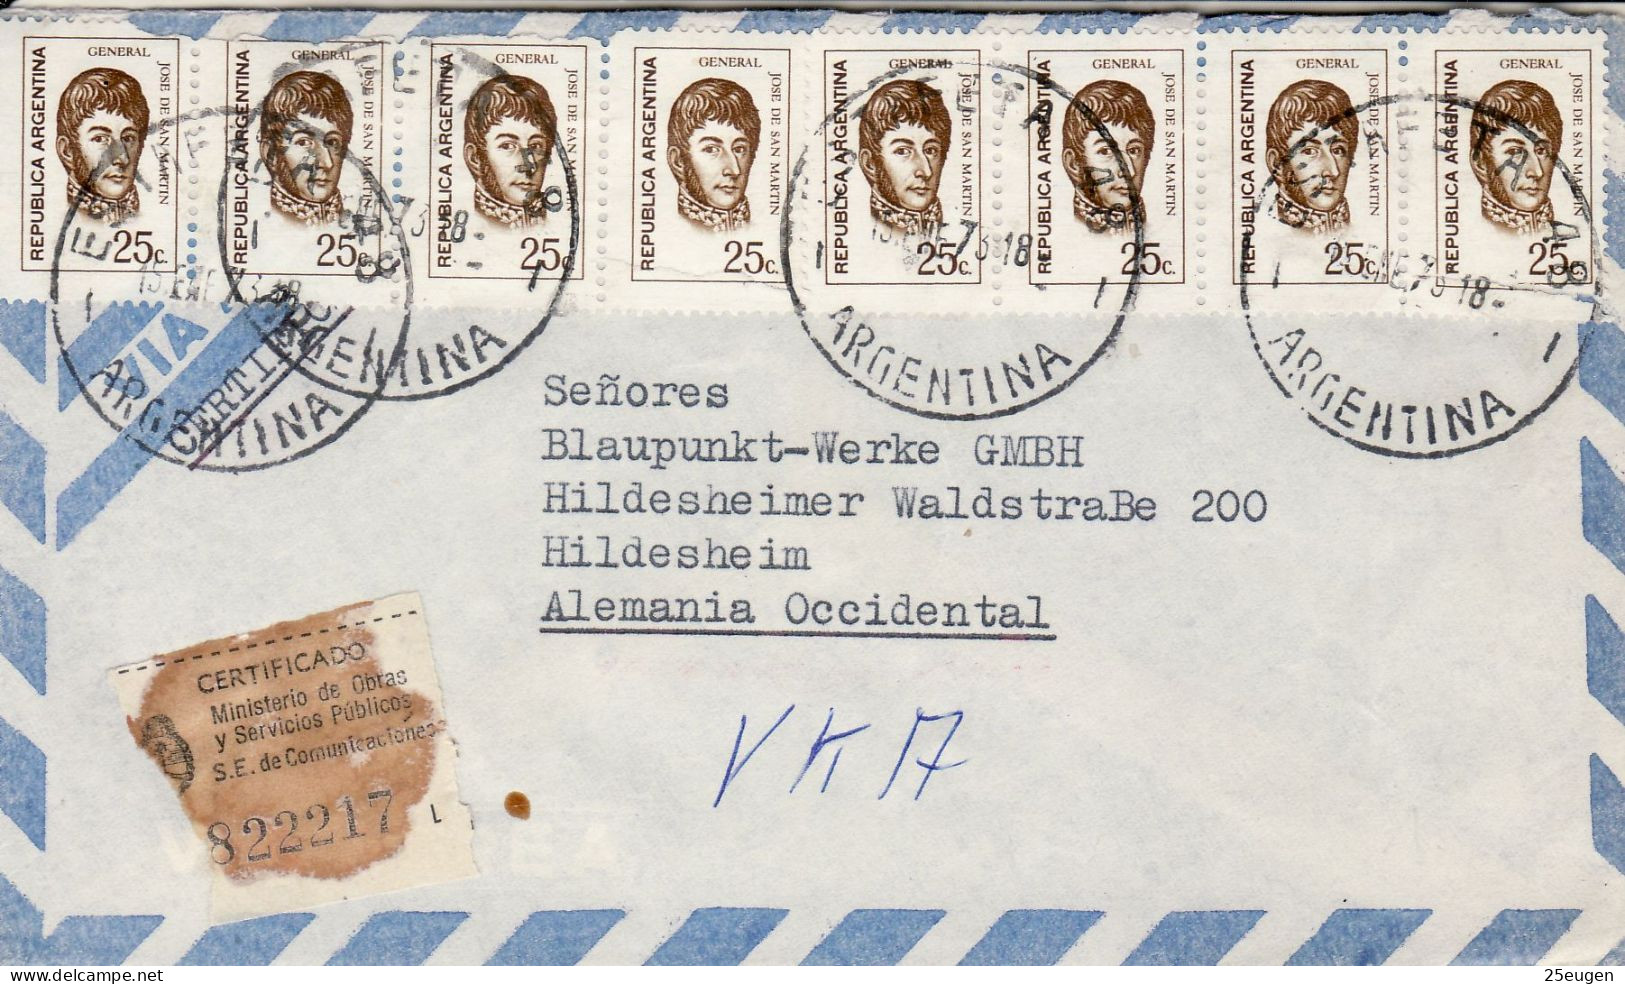 ARGENTINA 1973  AIRMAIL LETTER SENT FROM BUENOS AIRES TO HILDESHEIM - Briefe U. Dokumente